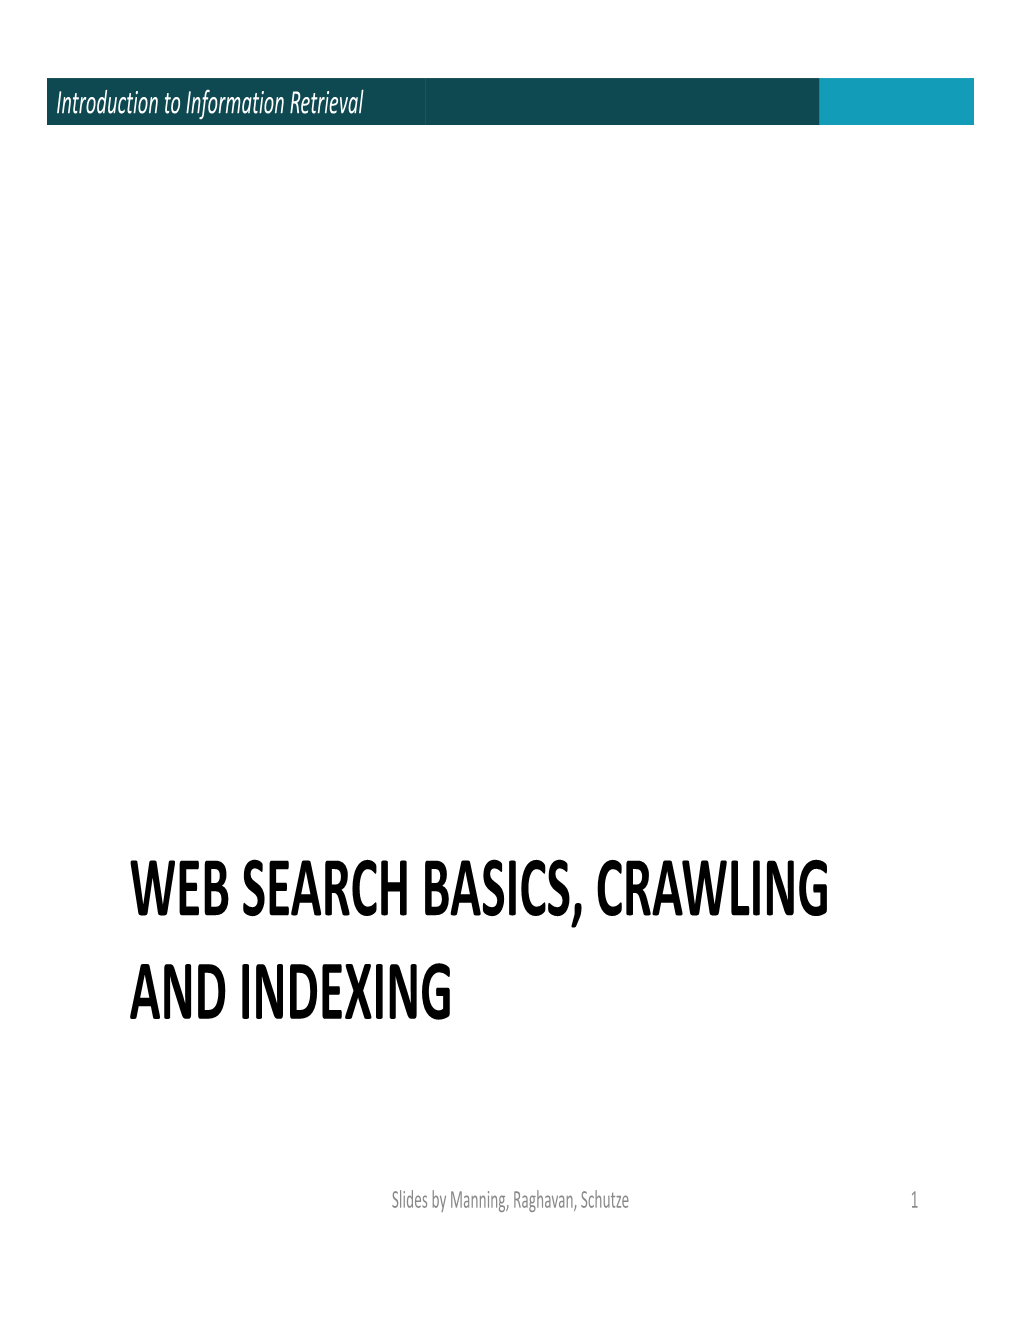 Web Search Basics, Crawling and Indexing